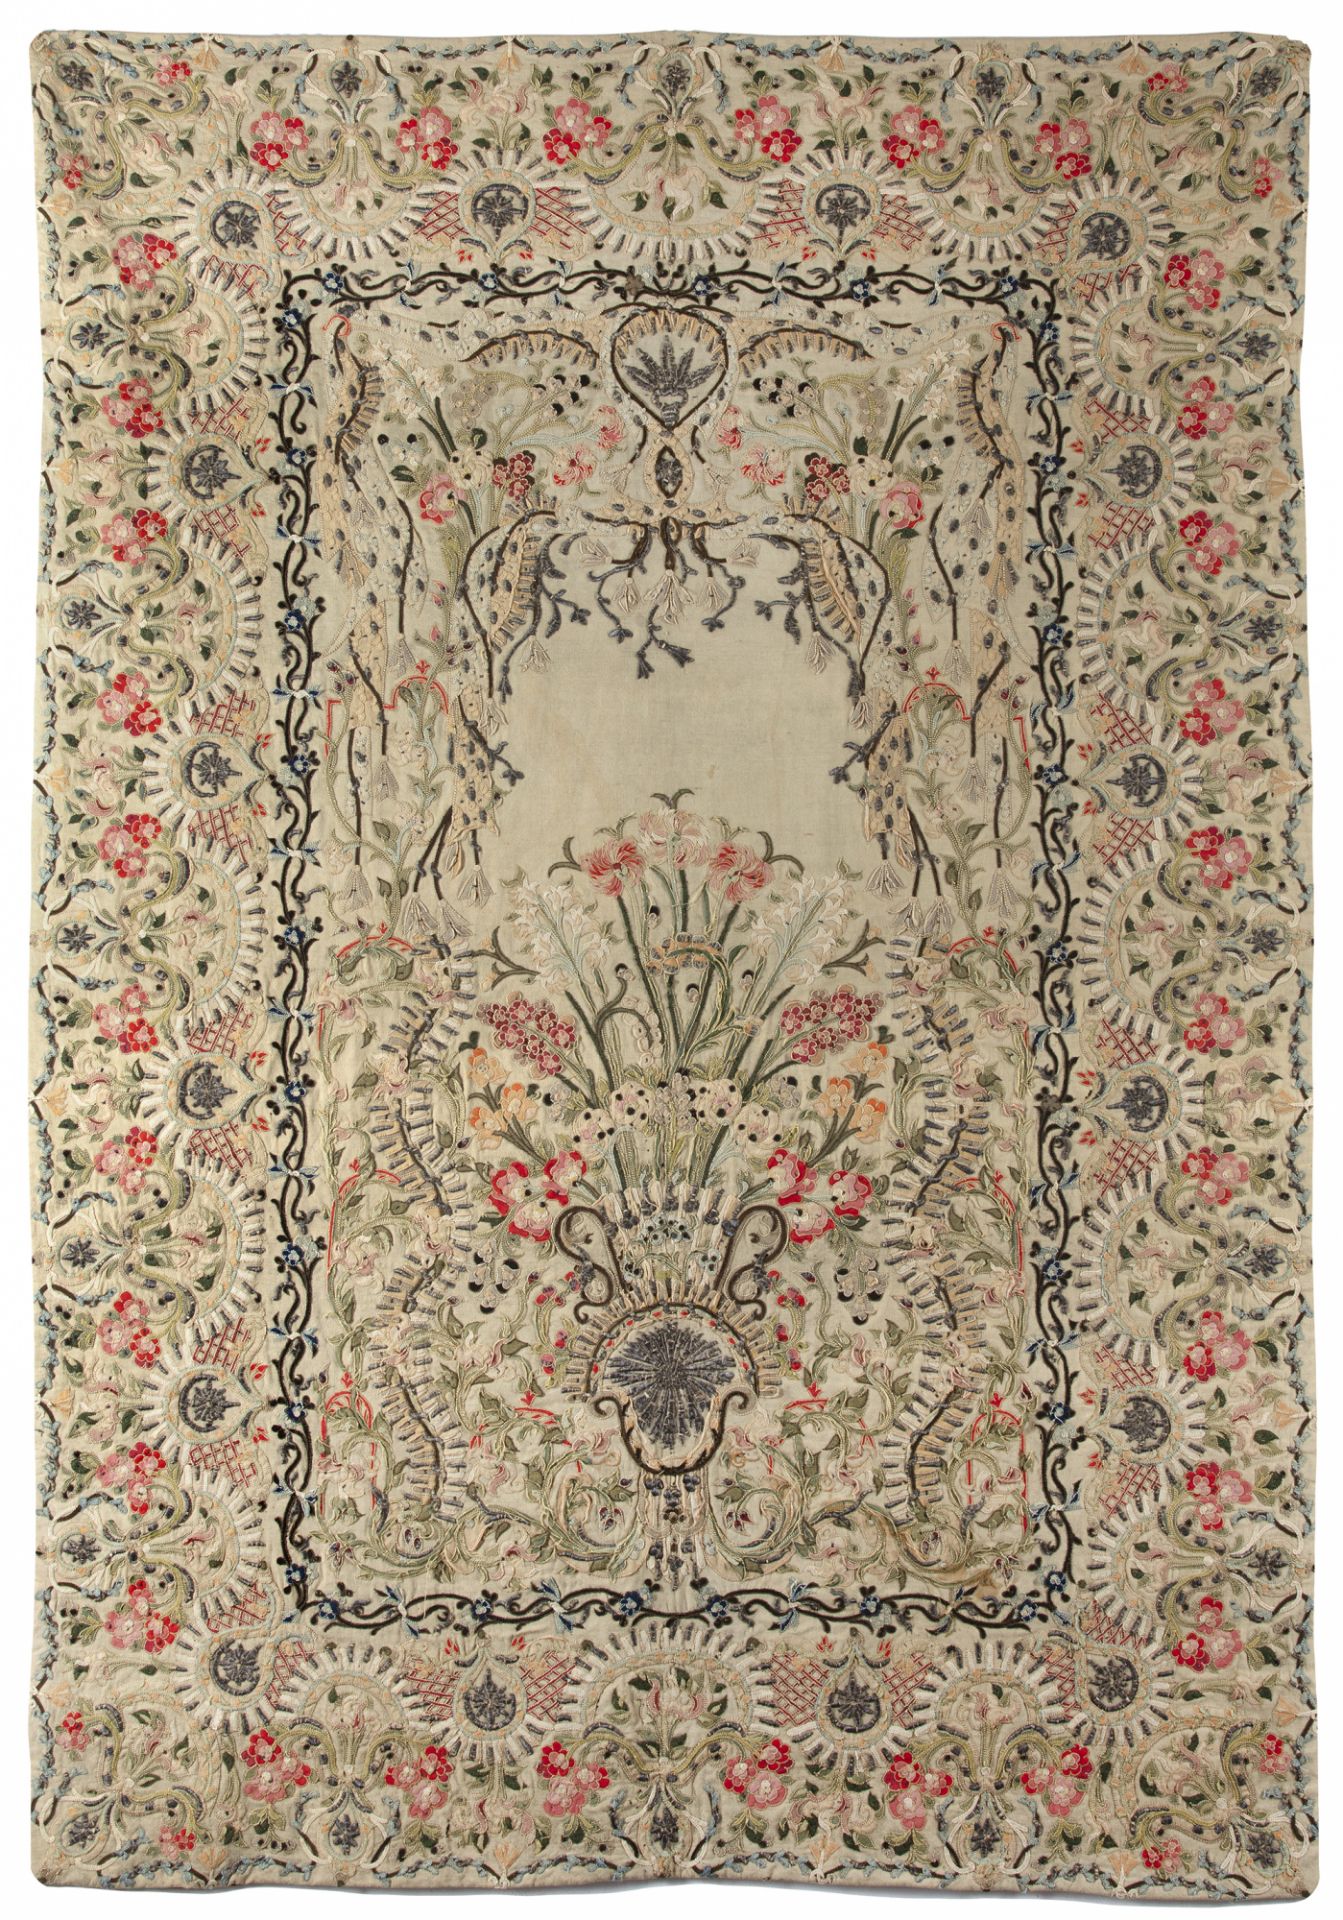 A BANYA LUKA EMBROIDERED AND APPLIQUE PANEL , OTTOMAN, EARLY 19TH CENTURY